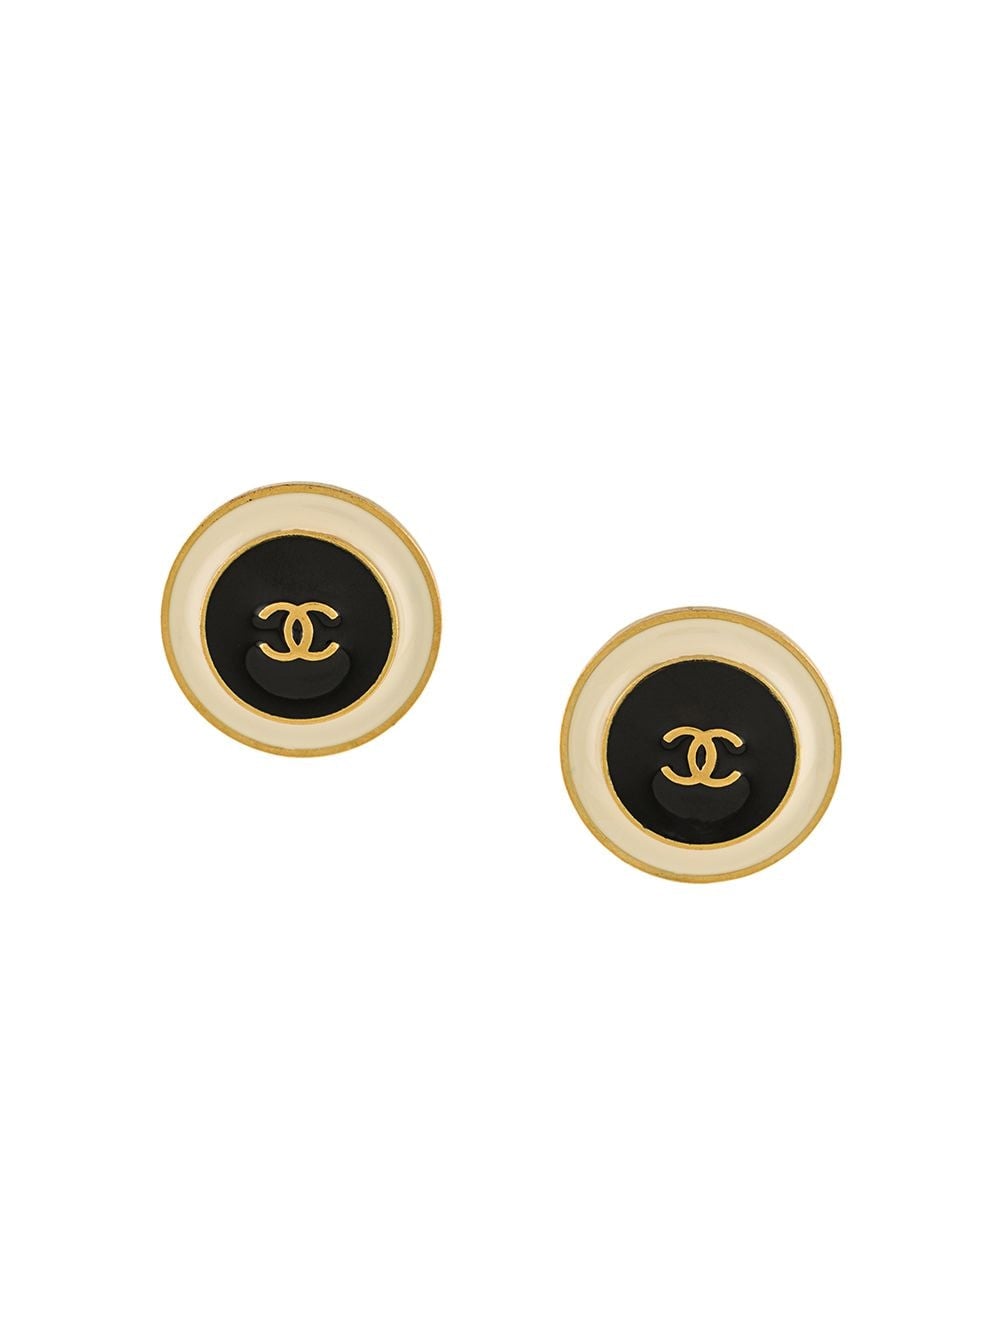 Chanel Pre-Owned 1995 CC Clip-On Earrings